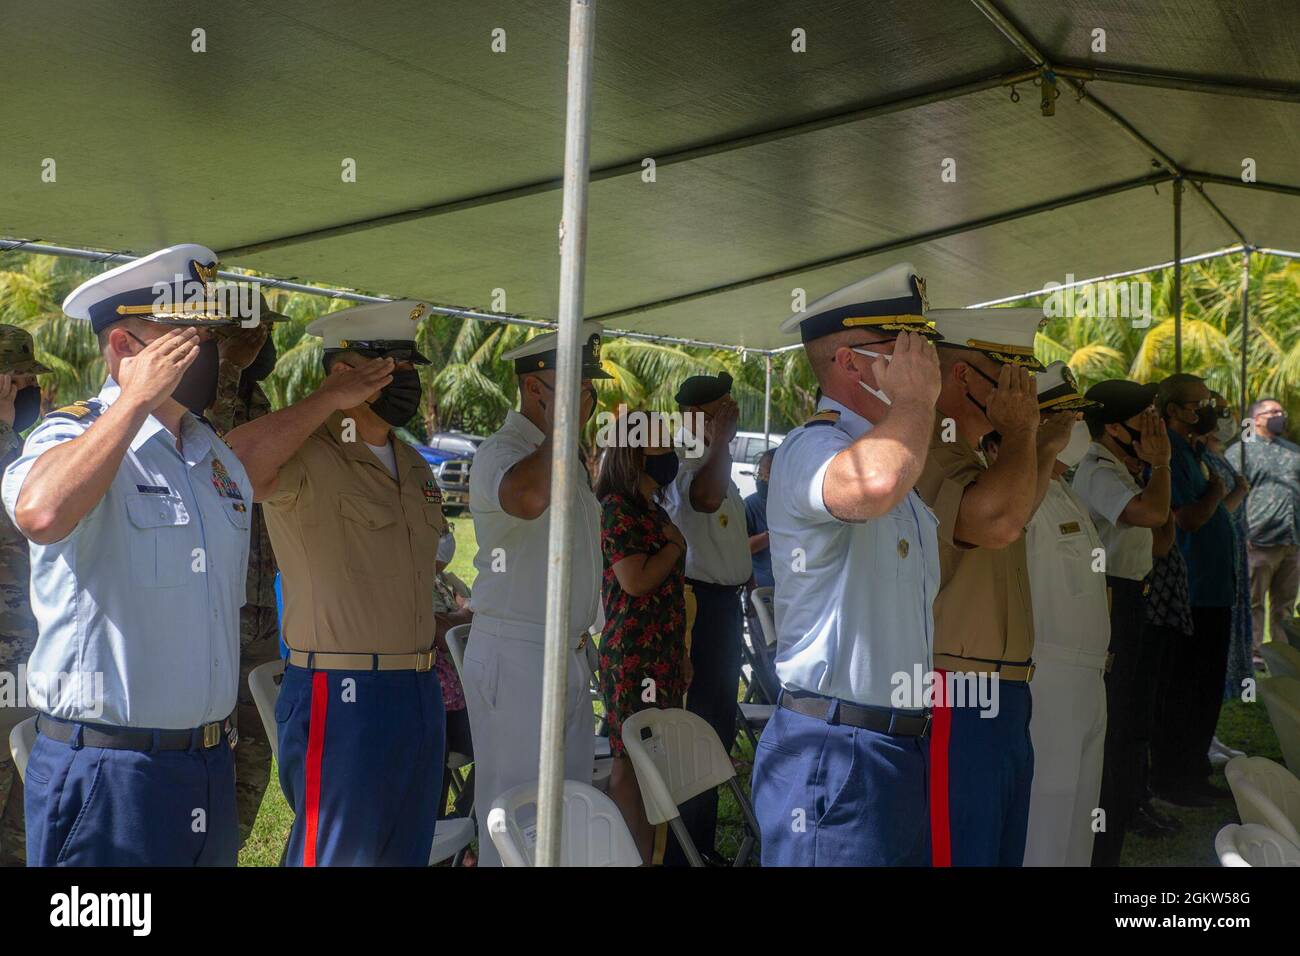 Marine Corps Base (MCB) Camp Blaz senior leaders render a salute during the playing of the national anthem during a wreath laying ceremony and memorial service at the Manenggon memorial site, July 5, 2021. Manenggon was the site of one of the concentration camps for the CHamoru people during World War II. The memorial service was among the many held across the island to commemorate the liberation of Guam during World War II in 1944. Stock Photo